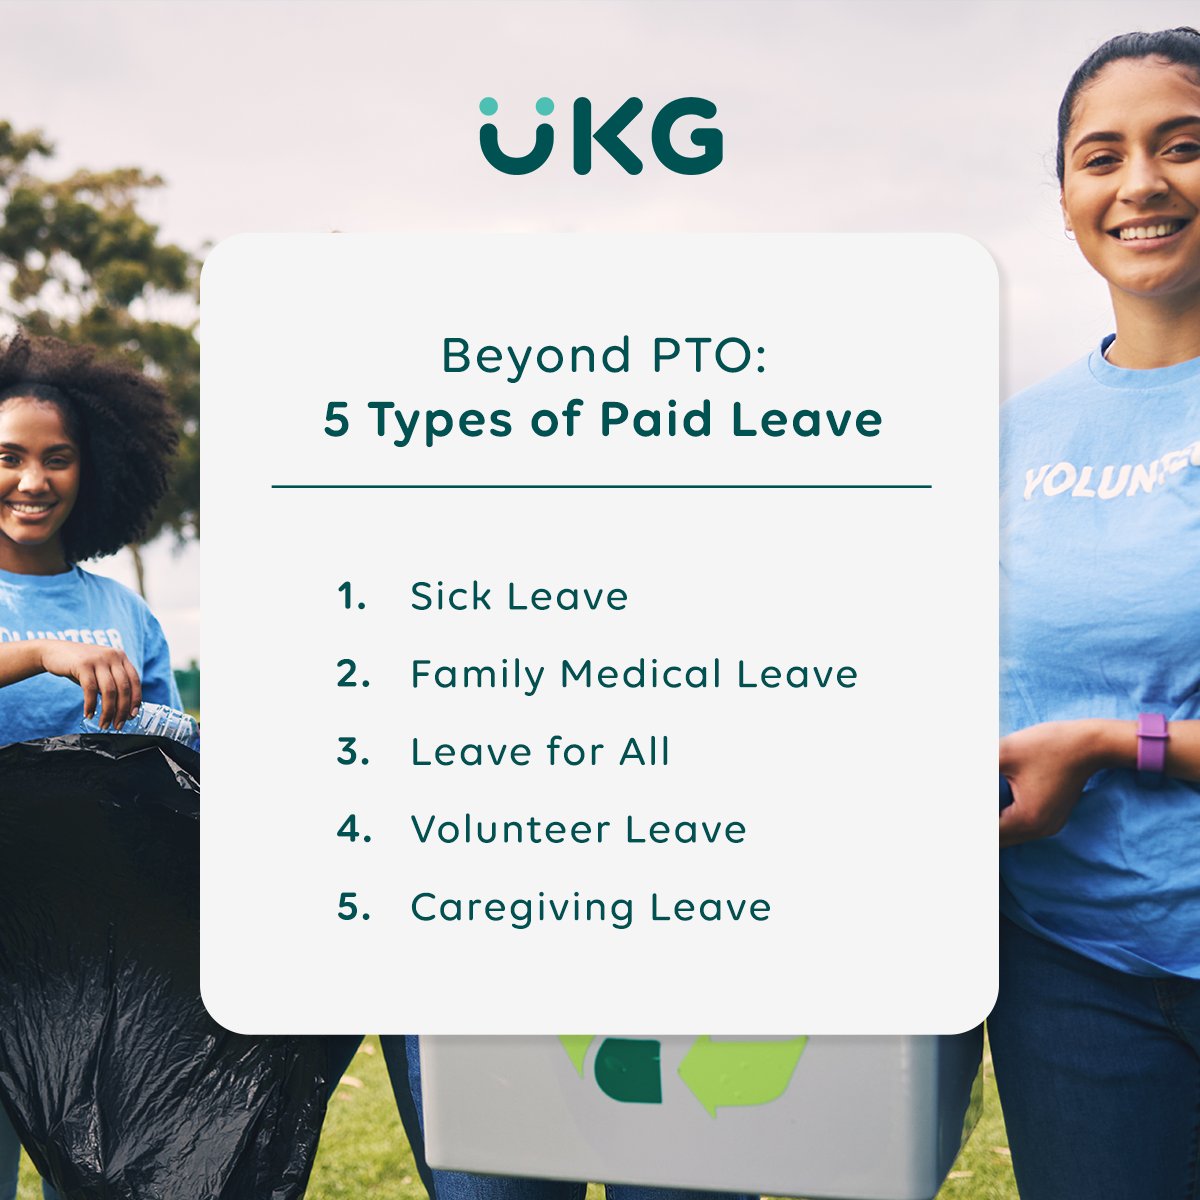 Discover how to go beyond paid time off and embrace these 5 types of paid leave. From parental to volunteer time off, find out how these policies can transform your workplace culture: ukg.inc/3WL3sCG. #UKGBlog #BlogPost #WeAreUKG #WorkplaceBenefits #WorkplaceCulture